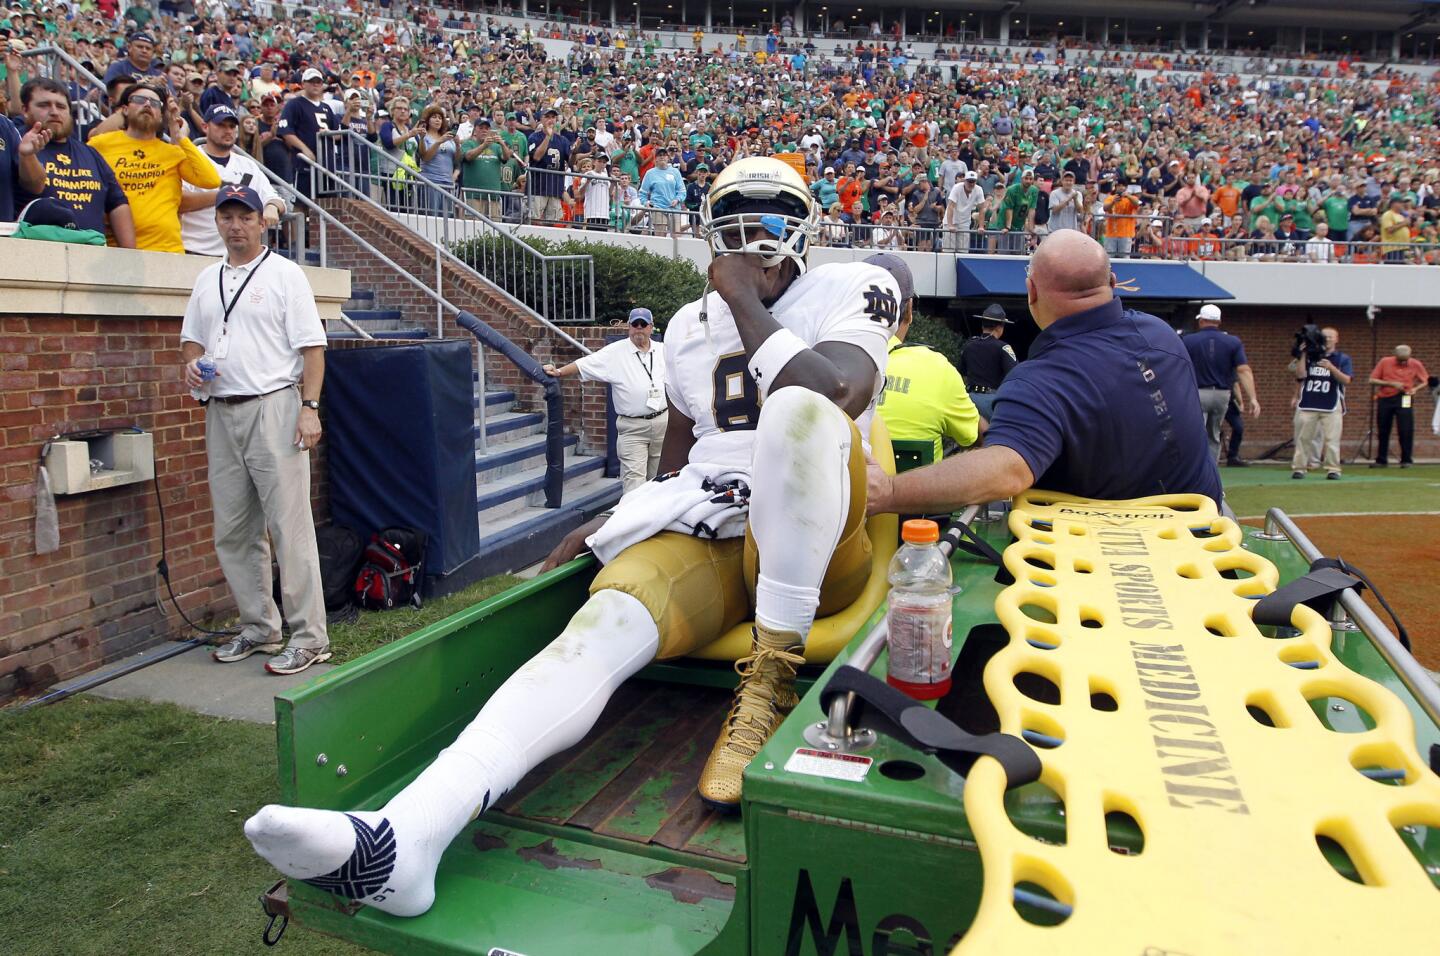 Notre Dame quarterback Malik Zaire is driven off the field after fracturing his right ankle during the third quarter. He will be out for the rest of the season.